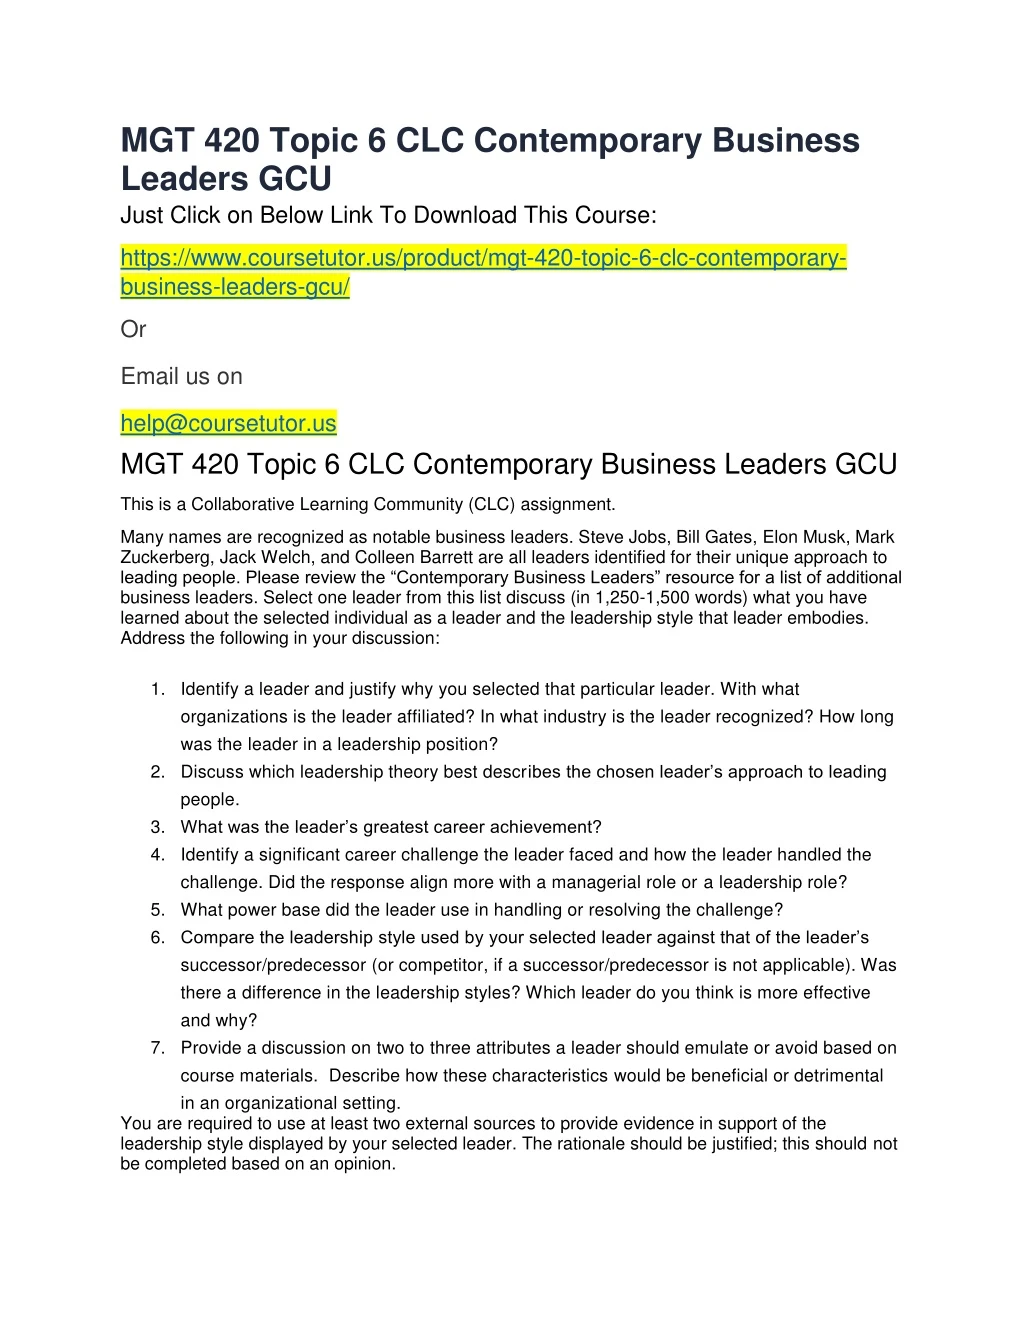 mgt 420 topic 6 clc contemporary business leaders